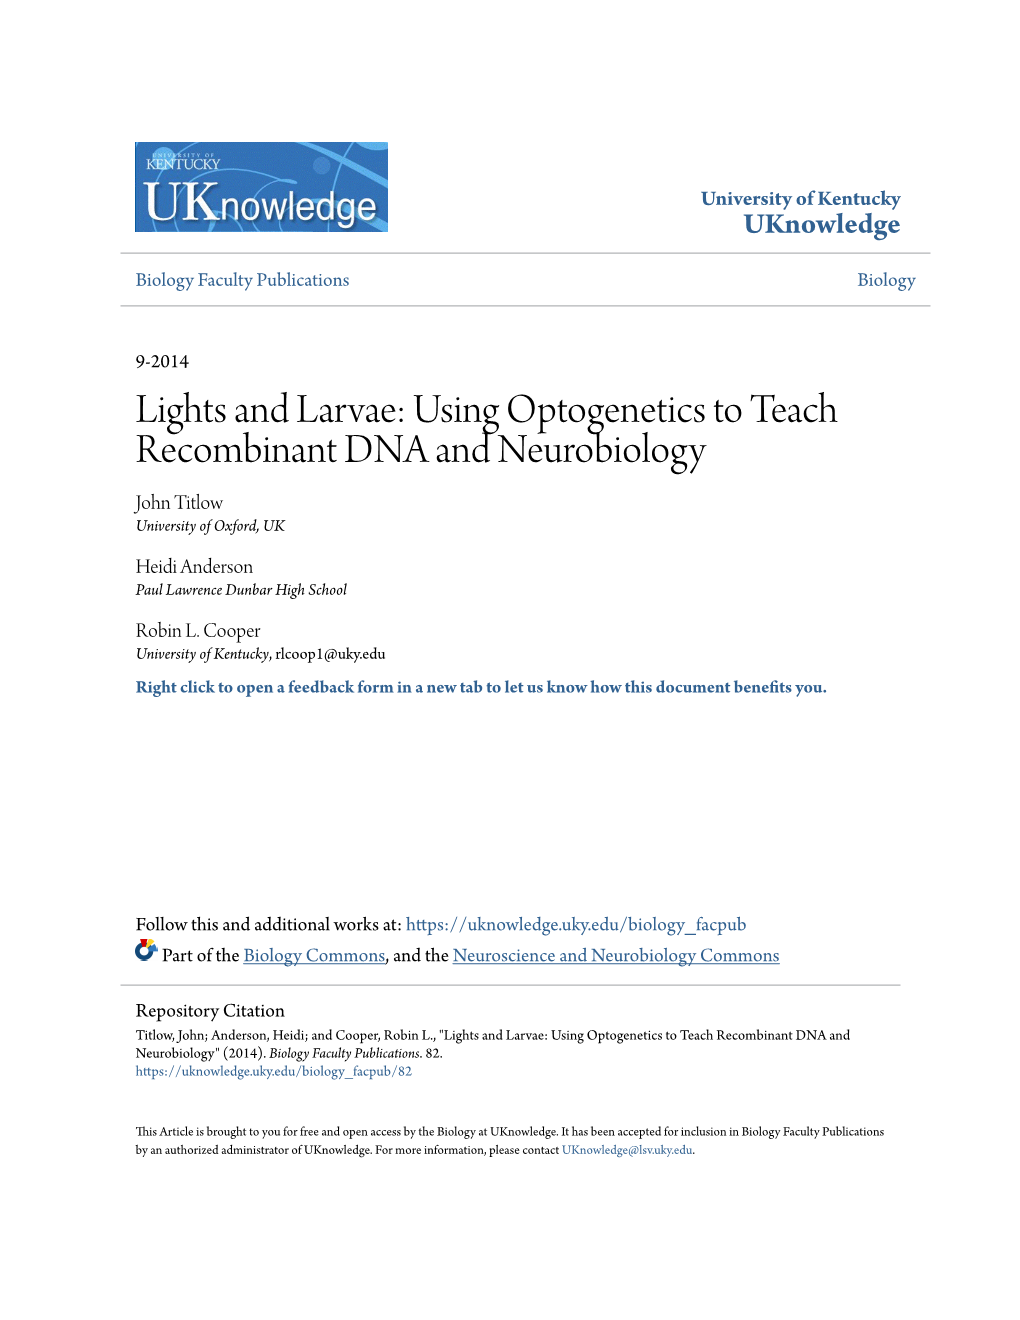 Using Optogenetics to Teach Recombinant DNA and Neurobiology John Titlow University of Oxford, UK